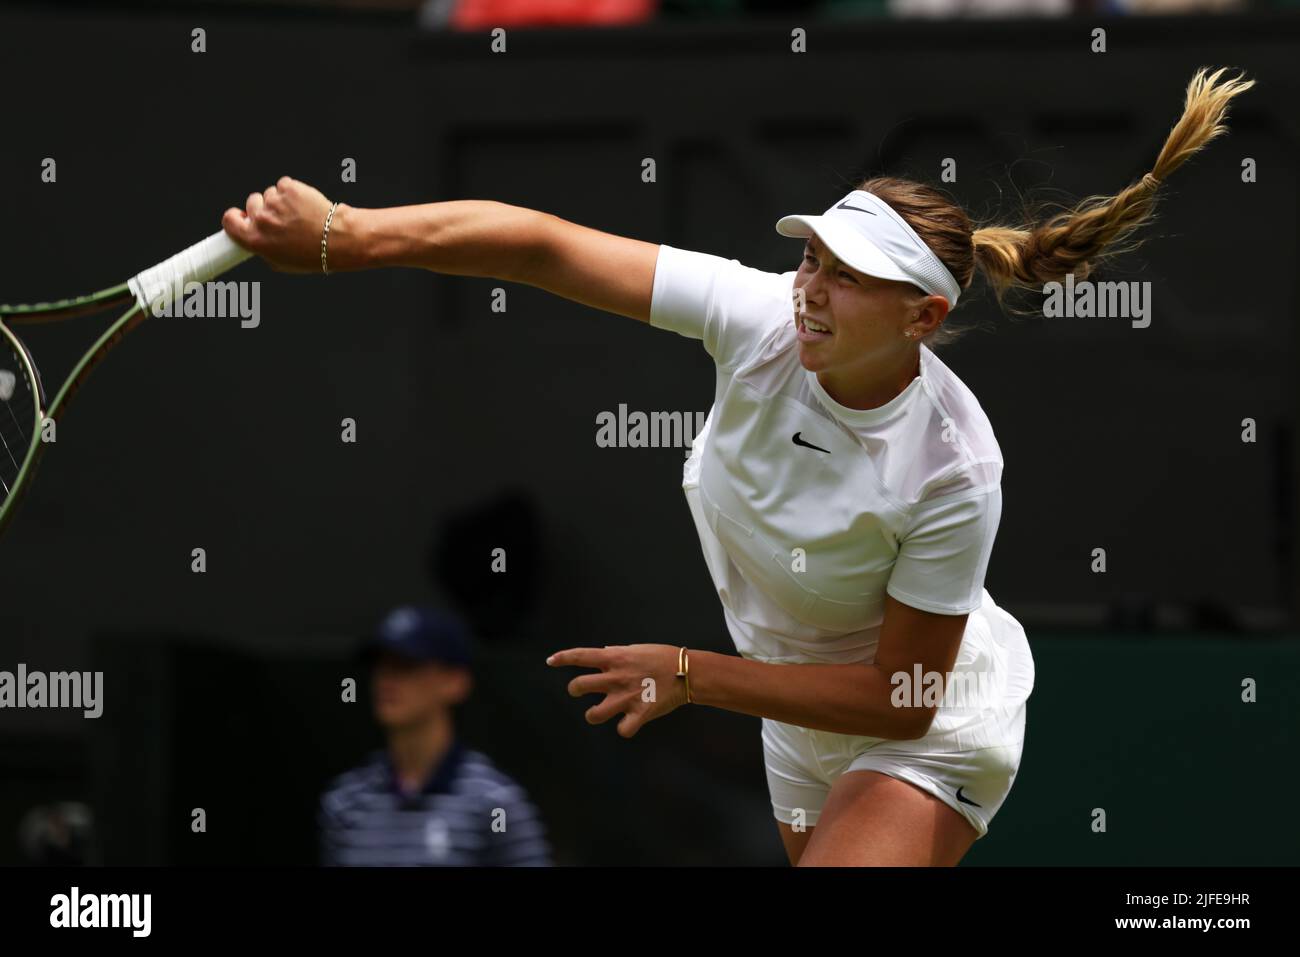 London. Amanda Anisimova of the, United States. 2nd July, 2022. serving during her victory over number 11 seed Coco Gauf on Centre Court at Wimbledon today. Credit: Adam Stoltman/Alamy Live News Stock Photo